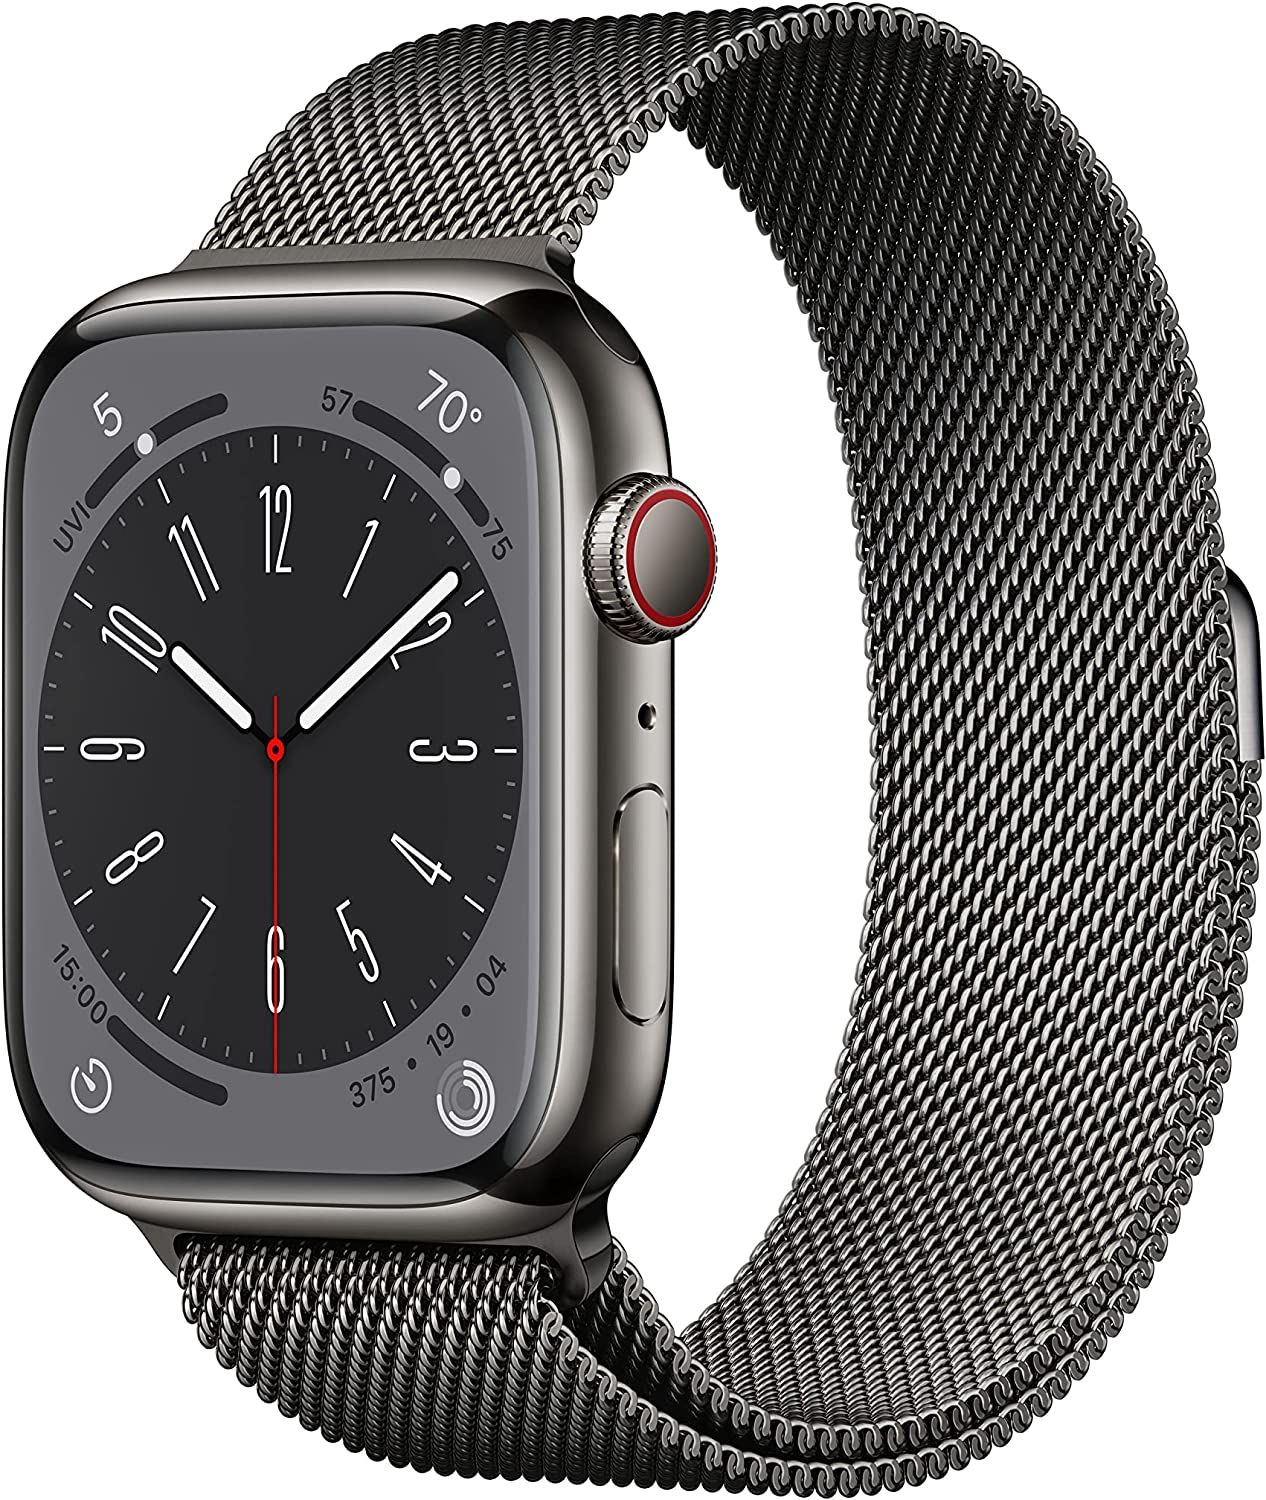 Best Deals Today: Apple Watch Series 8, Samsung Galaxy Tab S8, Acer ...